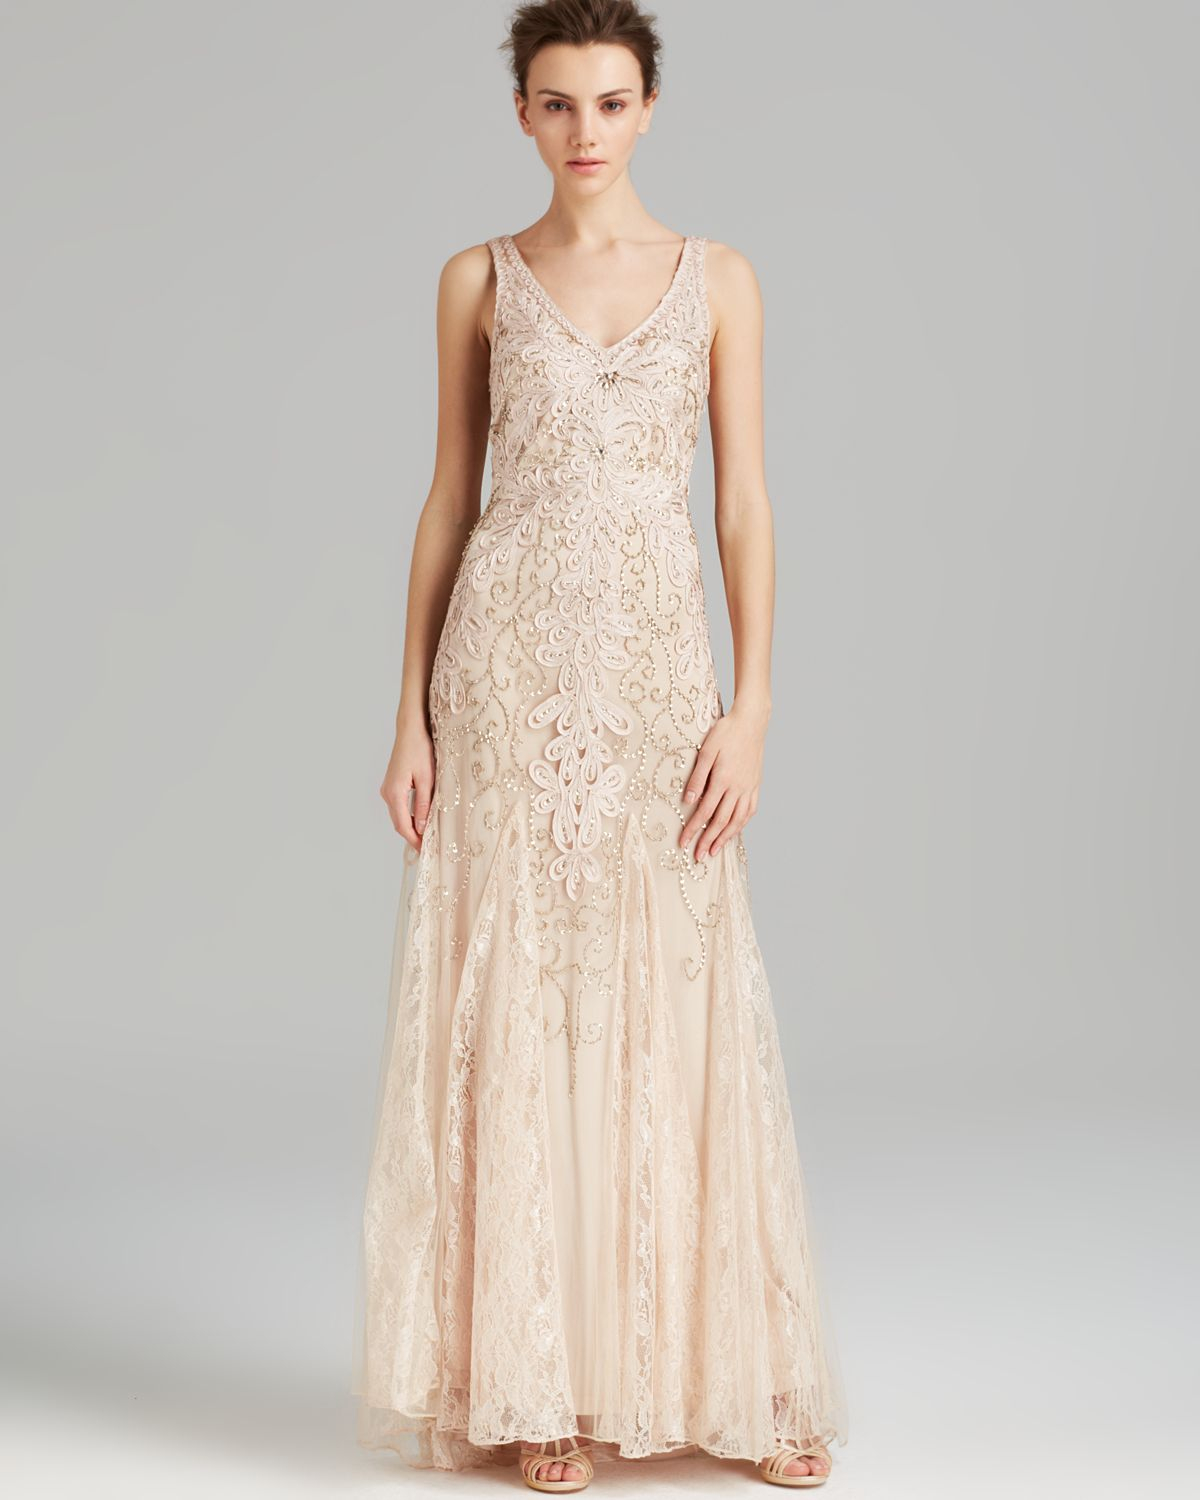 Lyst - Sue wong Gown - Double V Neck Soutache in Natural